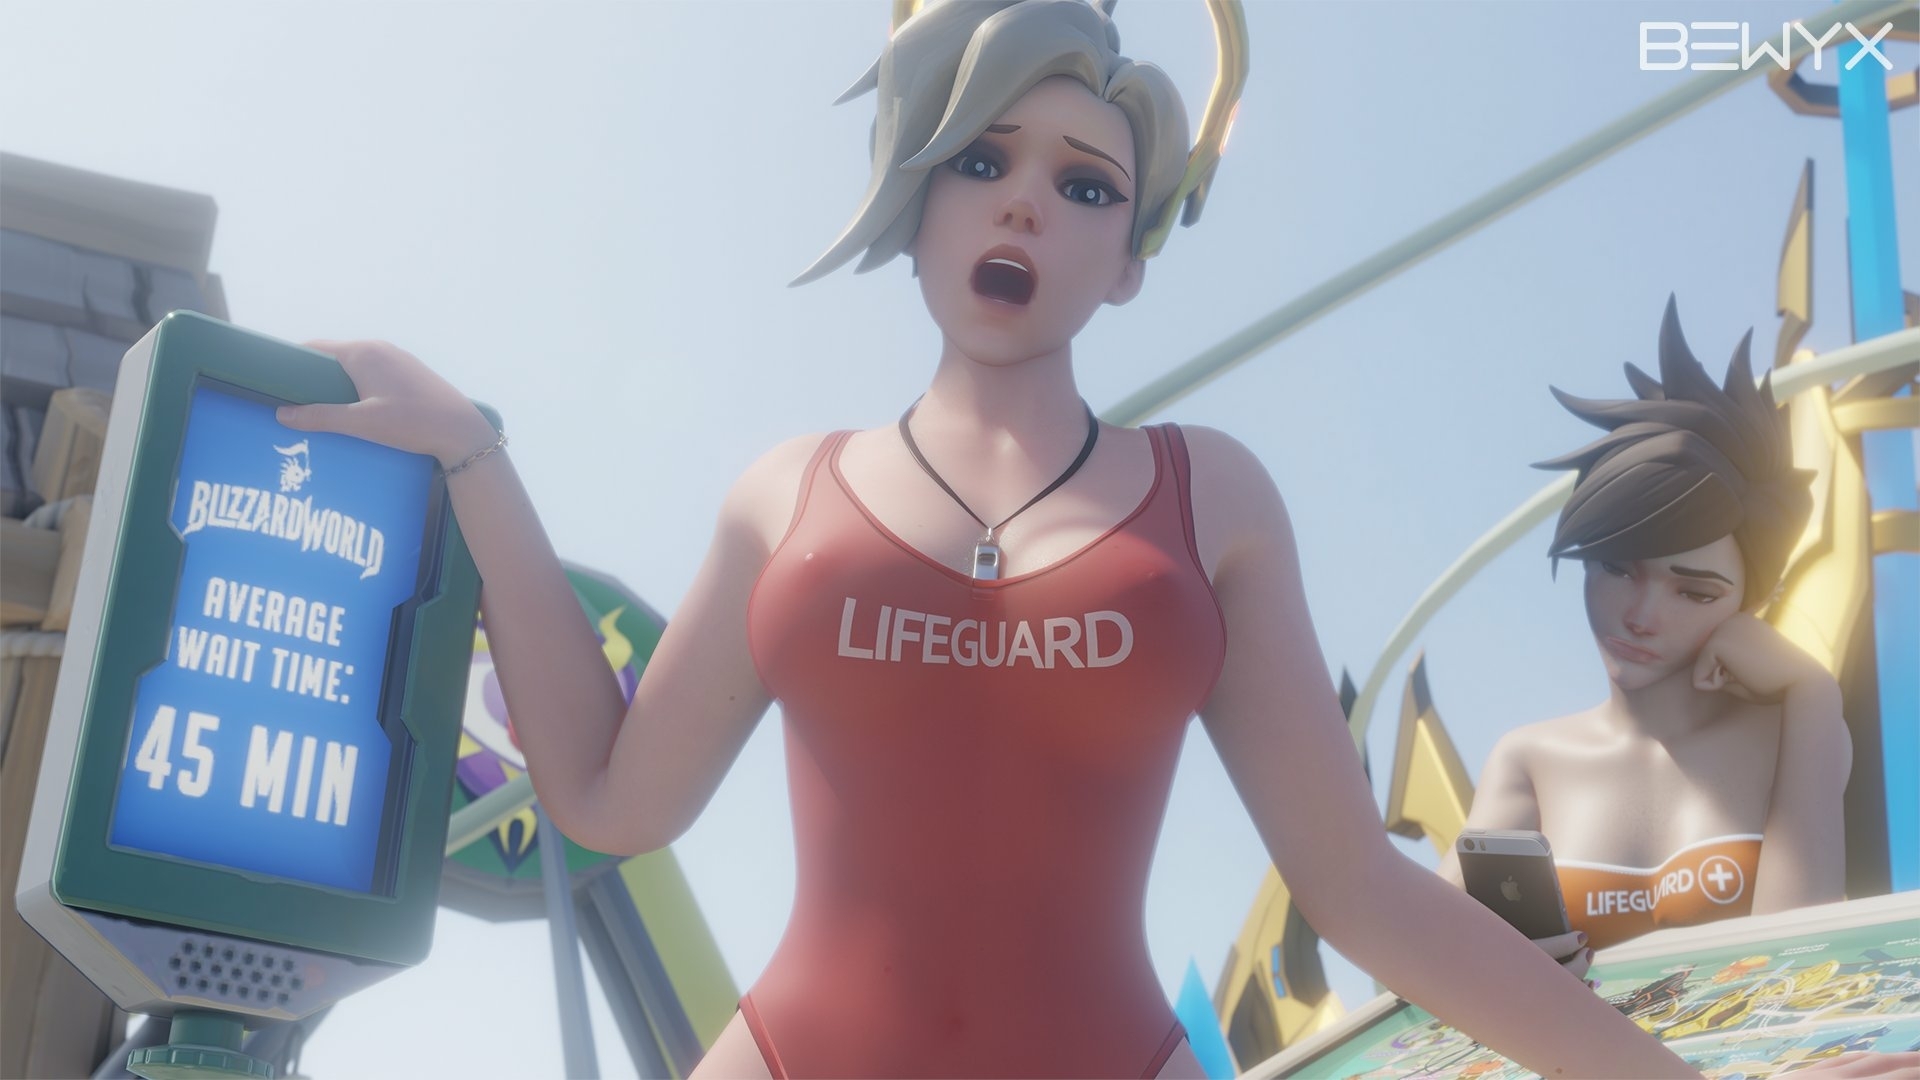 Mercy Lifeguard Average Wait Time Mercy Tracer Lifeguard 3d Porn Moaning Cowgirl Bouncing Boobs Baywatch Outdoor Sex Pussy Penetration Selfie 5